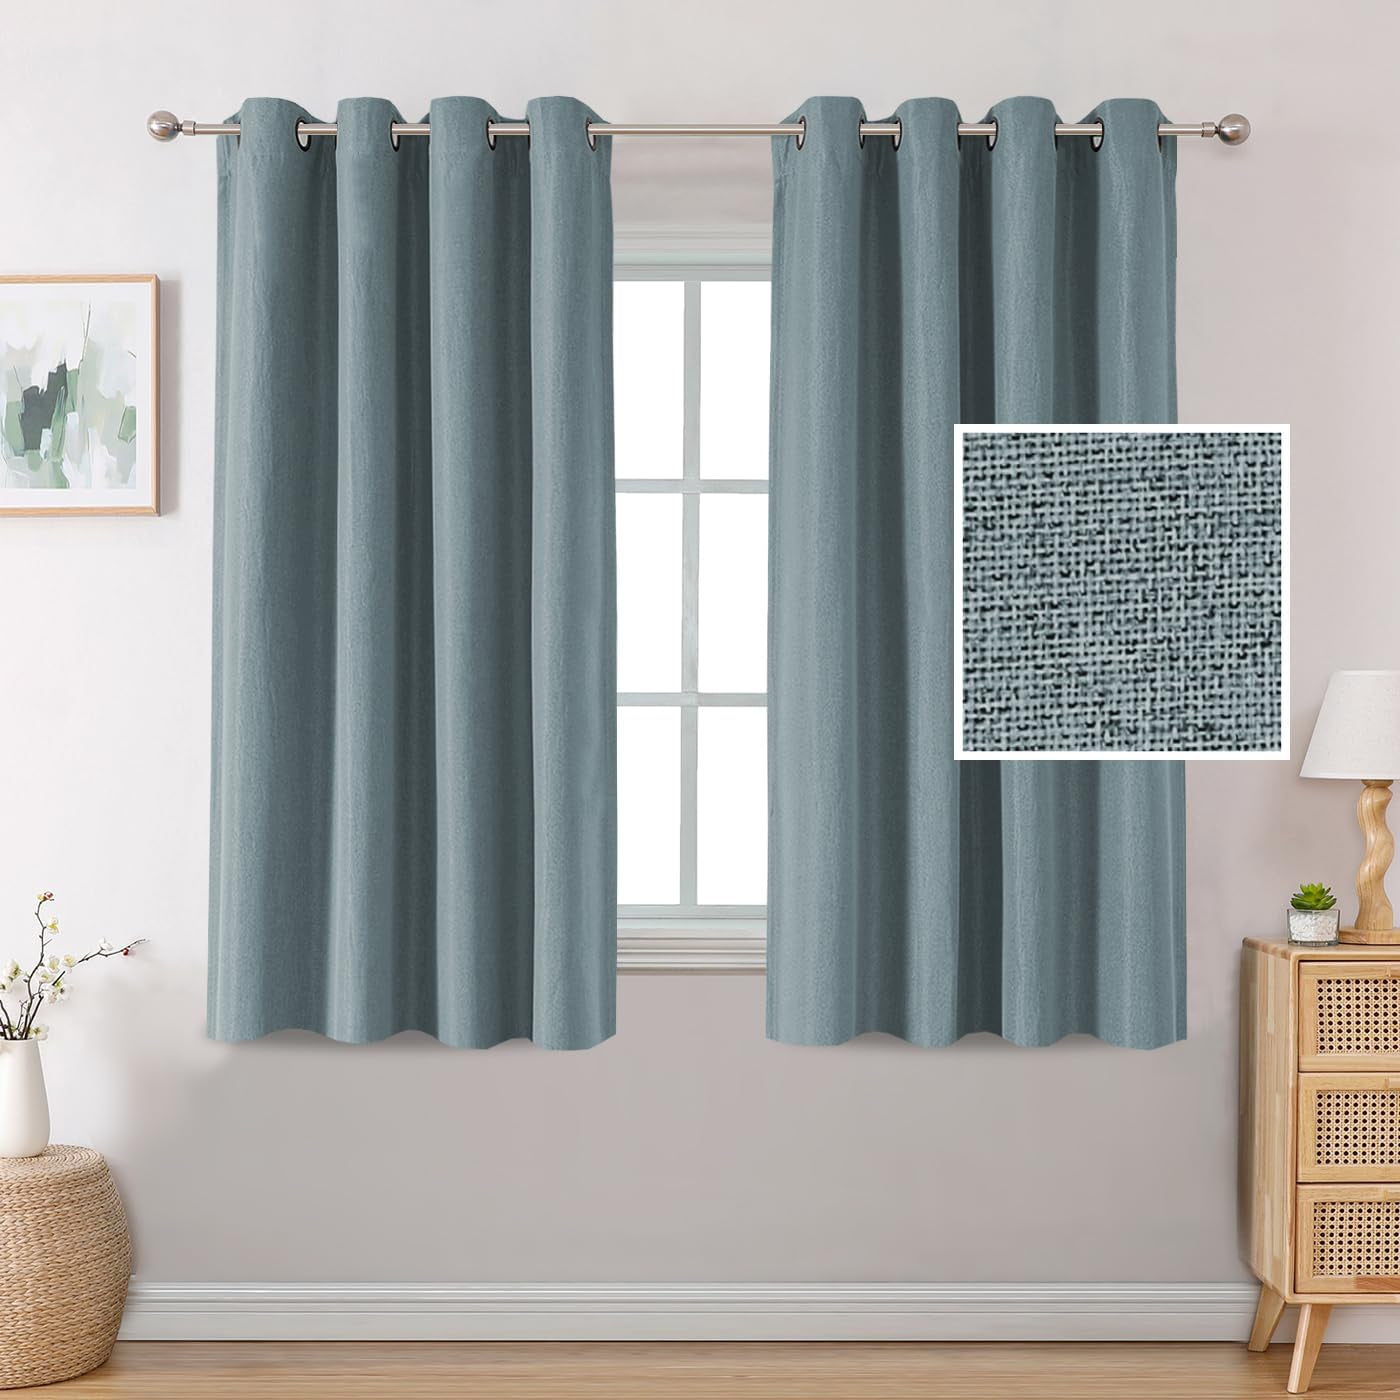 H.VERSAILTEX Linen Blackout Curtains 84 Inches Long Thermal Insulated Room Darkening Linen Curtains for Bedroom Textured Burlap Grommet Window Curtains for Living Room, Bluestone and Taupe, 2 Panels  H.VERSAILTEX Stone Blue 52"W X 45"L 